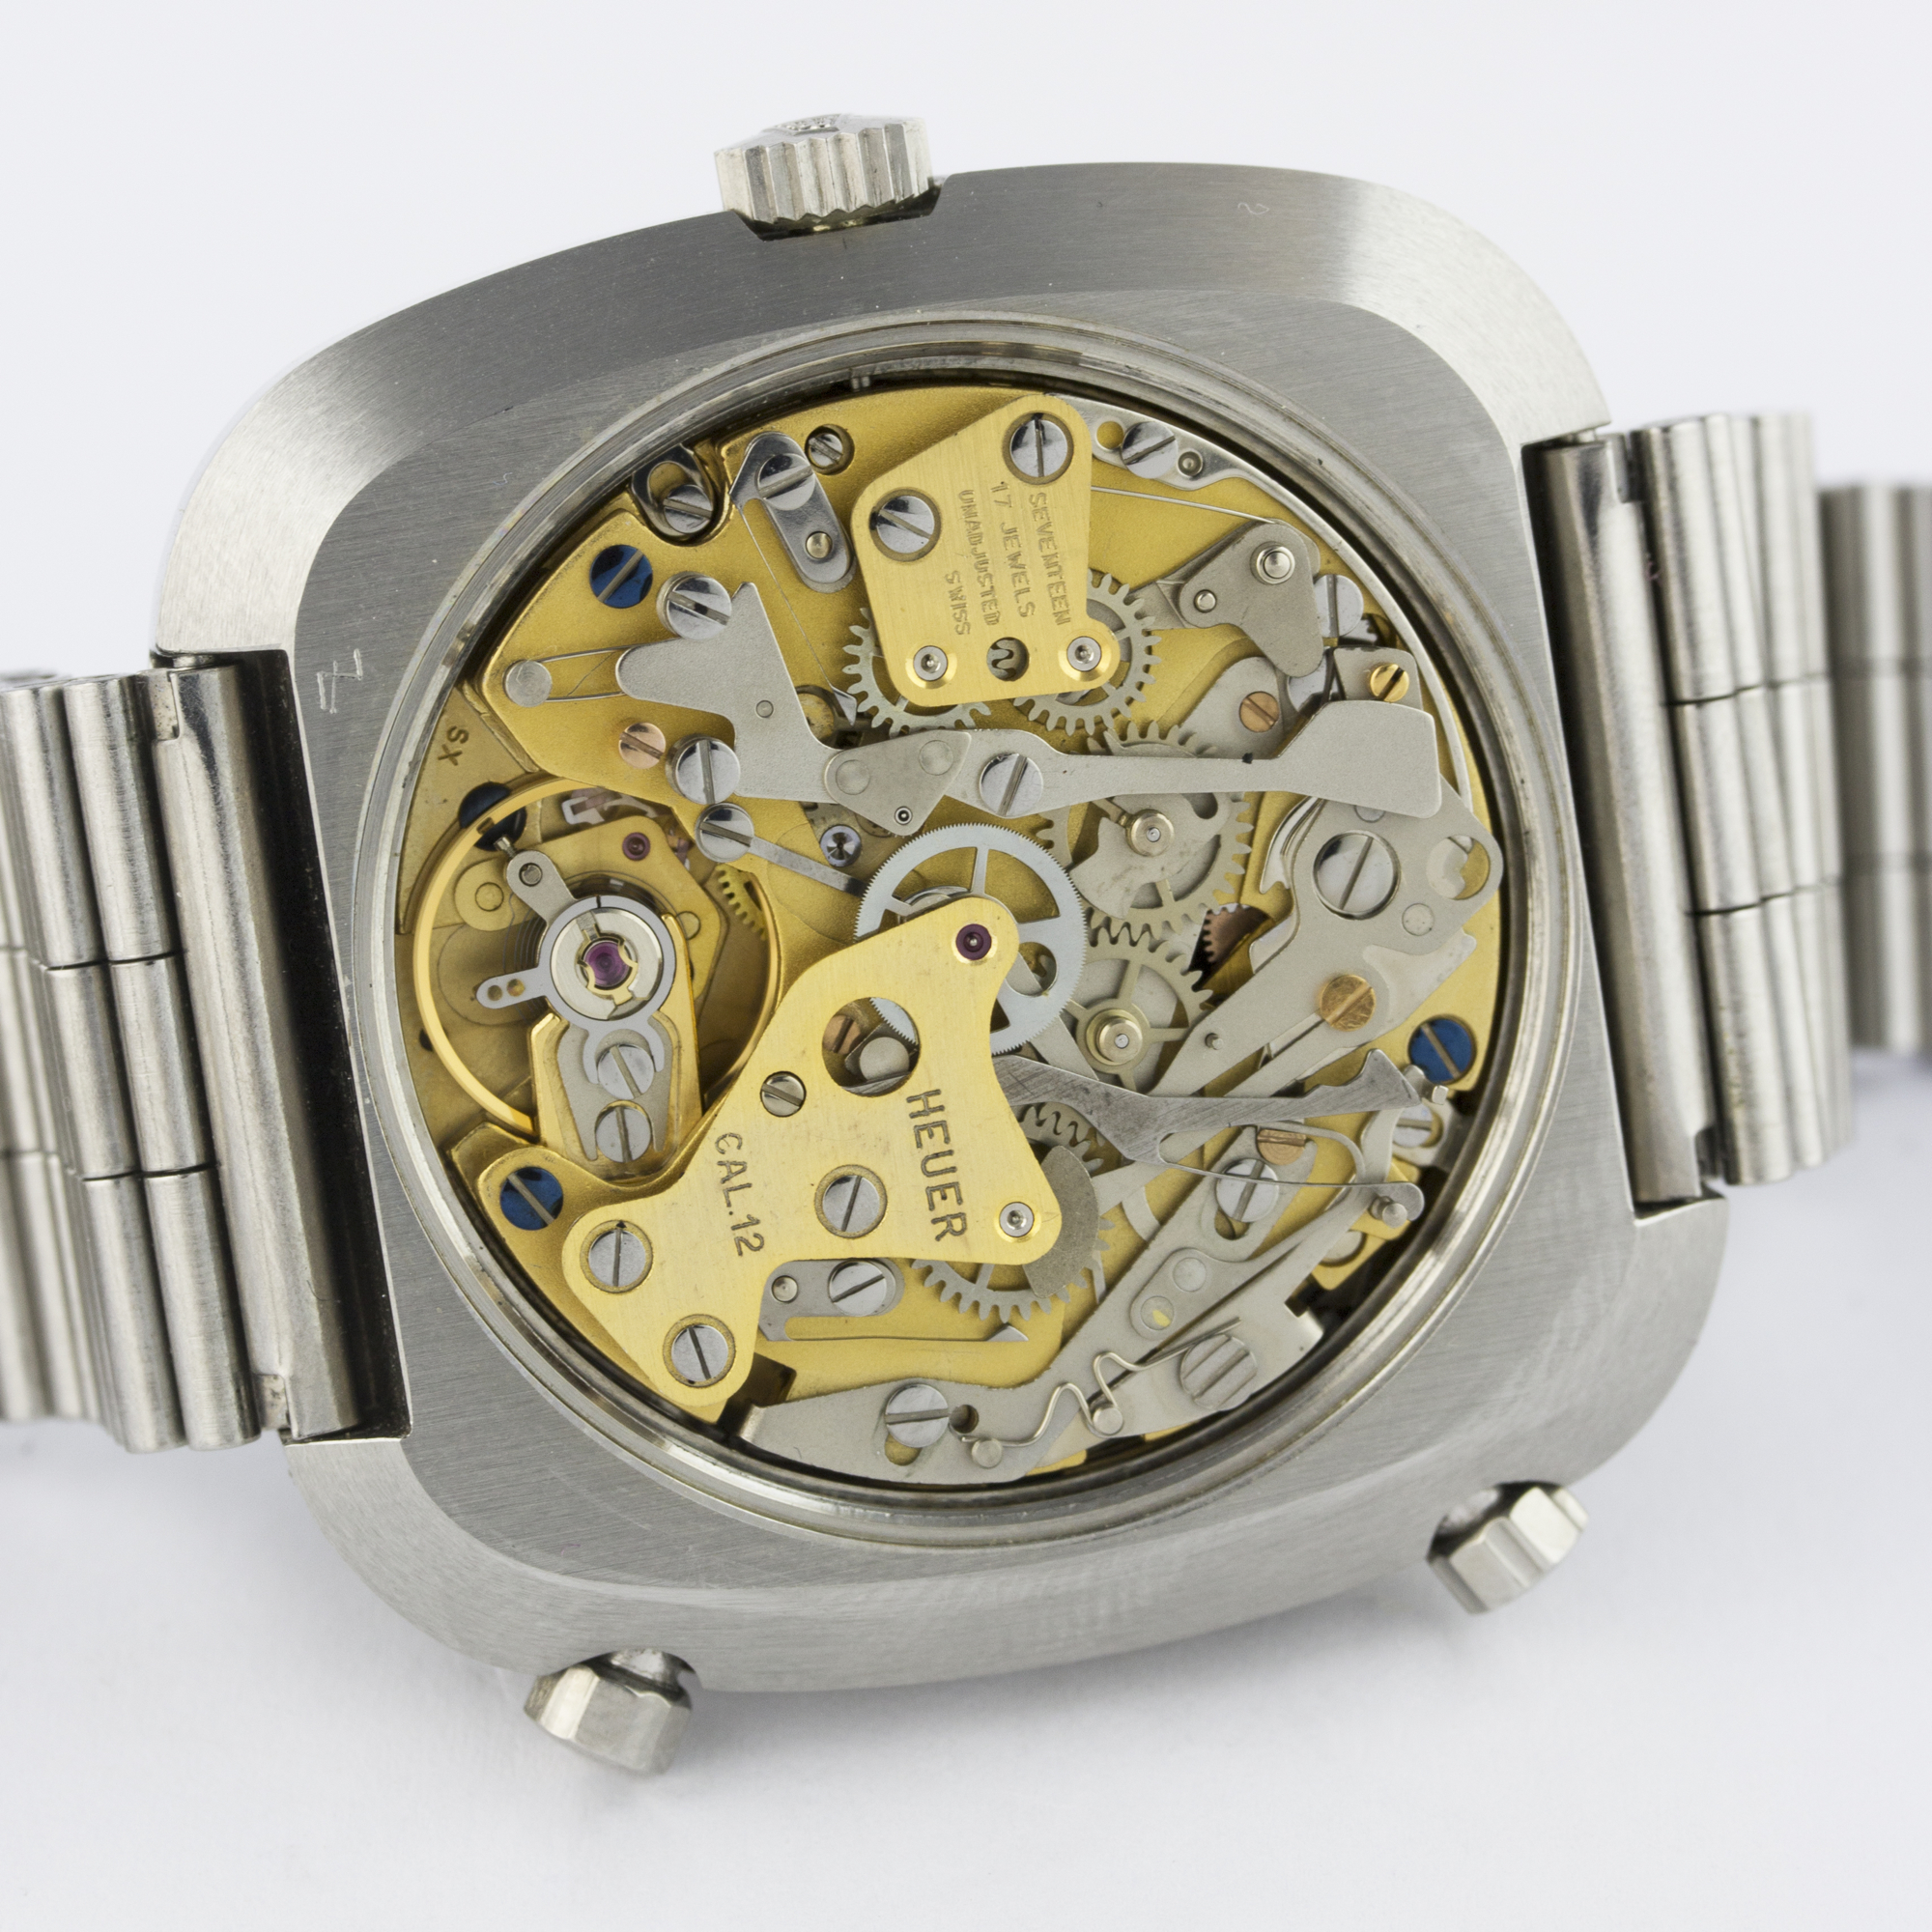 A RARE GENTLEMAN'S STAINLESS STEEL HEUER SILVERSTONE AUTOMATIC CHRONOGRAPH BRACELET WATCH CIRCA - Image 9 of 12